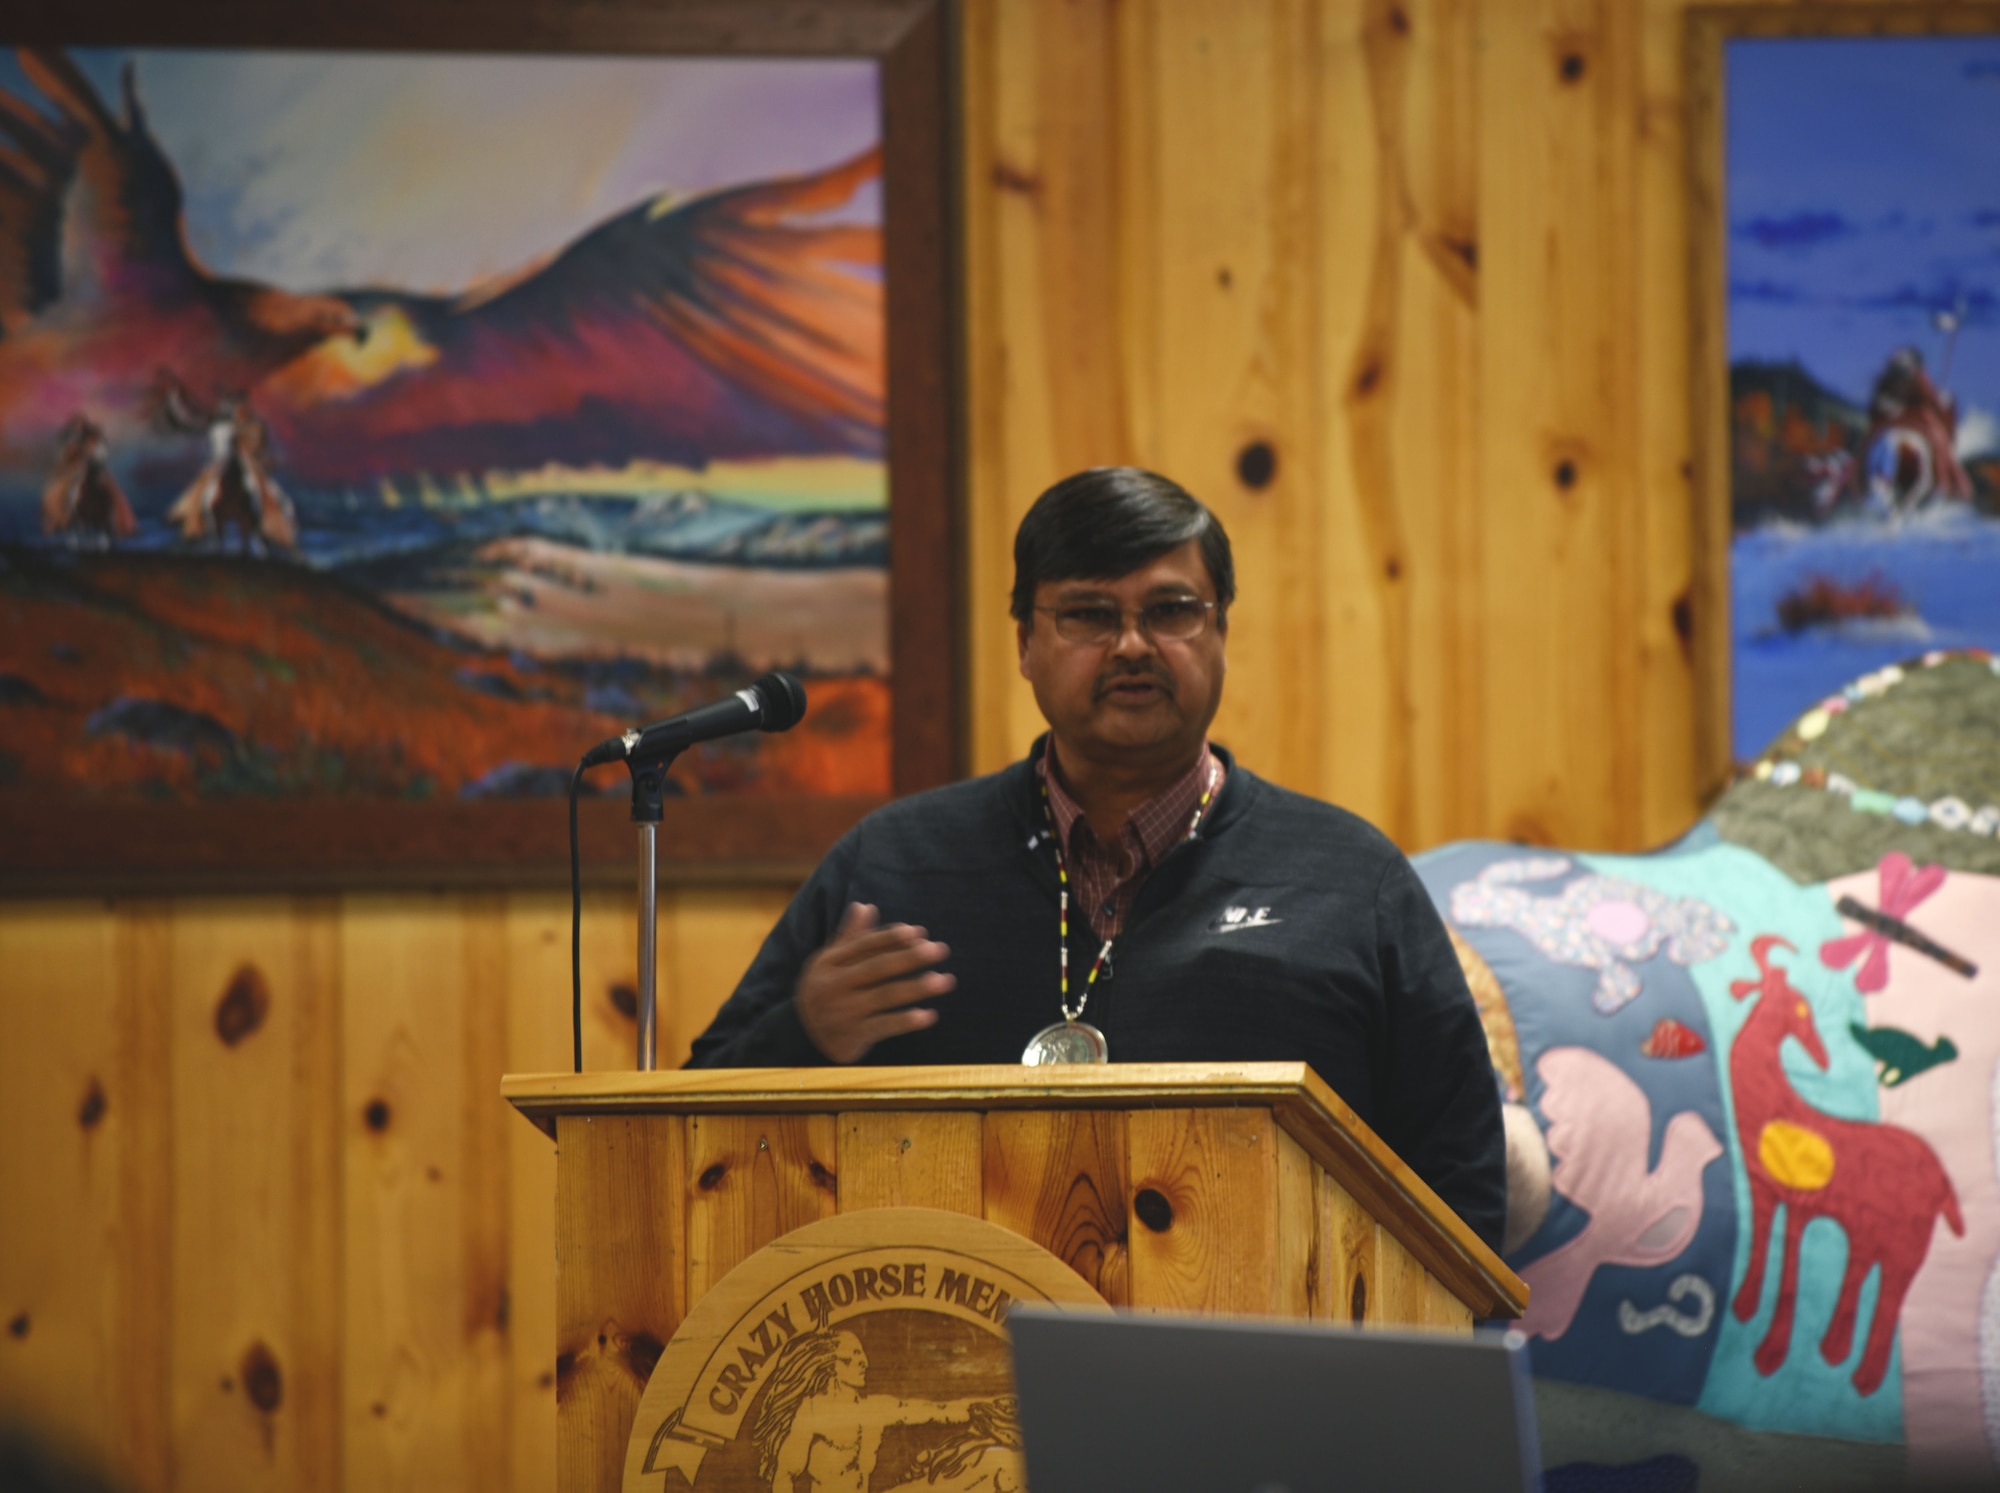 Boyd I. Gourneau, Chairman of the Lower Brule Sioux Tribe, performs the opening prayer at the Governors’ Interstate Indian Council assembly at Crazy Horse Memorial in Custer County, S.D., Sept. 26, 2018. Representatives from numerous states attended the 2018 GIIC assembly to discuss issues that influence the lives of Native American people across the country. (U.S. Air Force photo by Airman Christina M. Bennett)